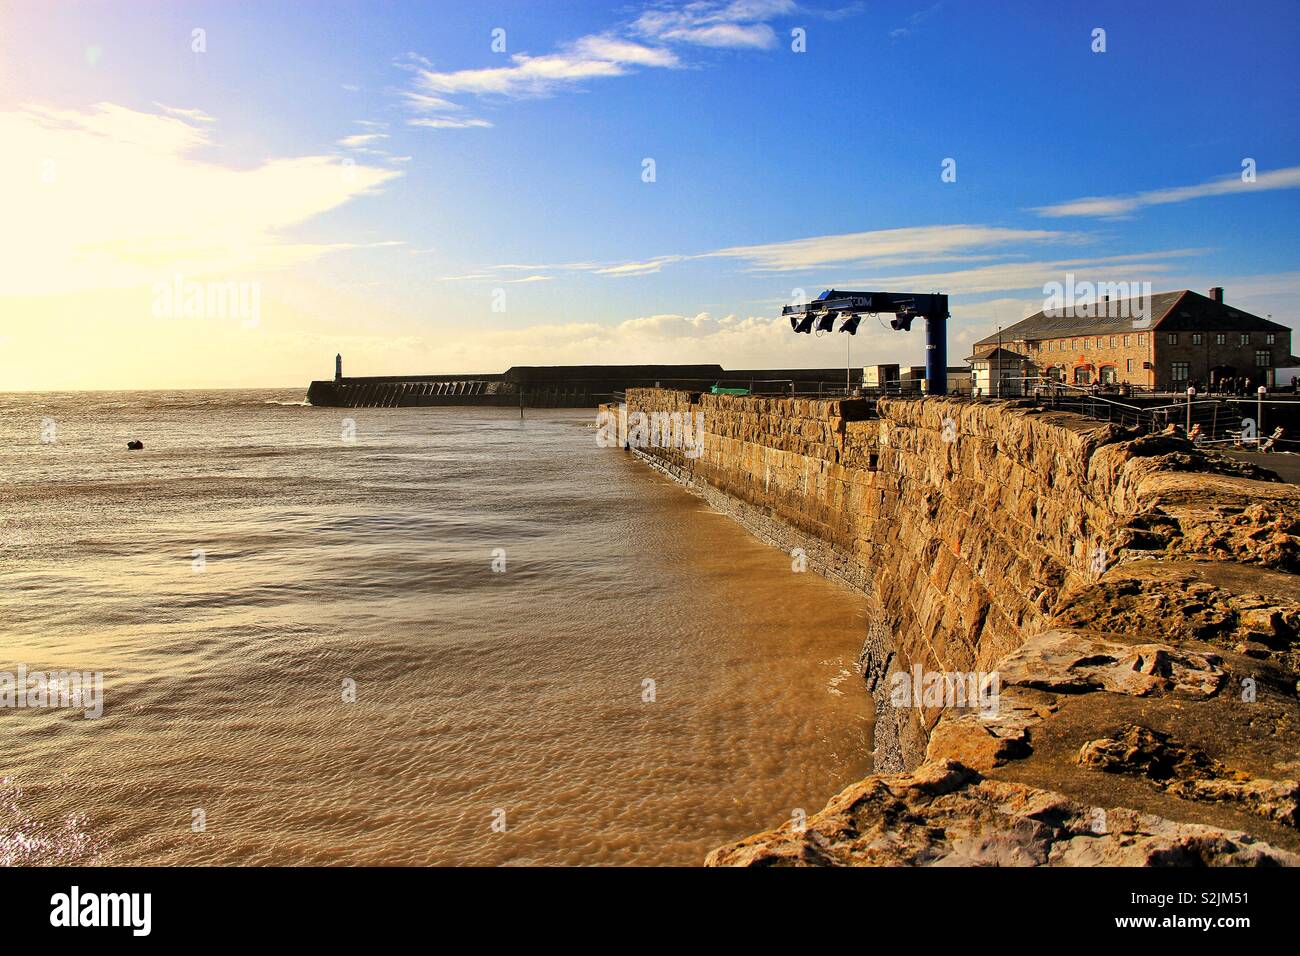 Boat lift displayed on old stone wall with lighthouse in background on a pier Stock Photo